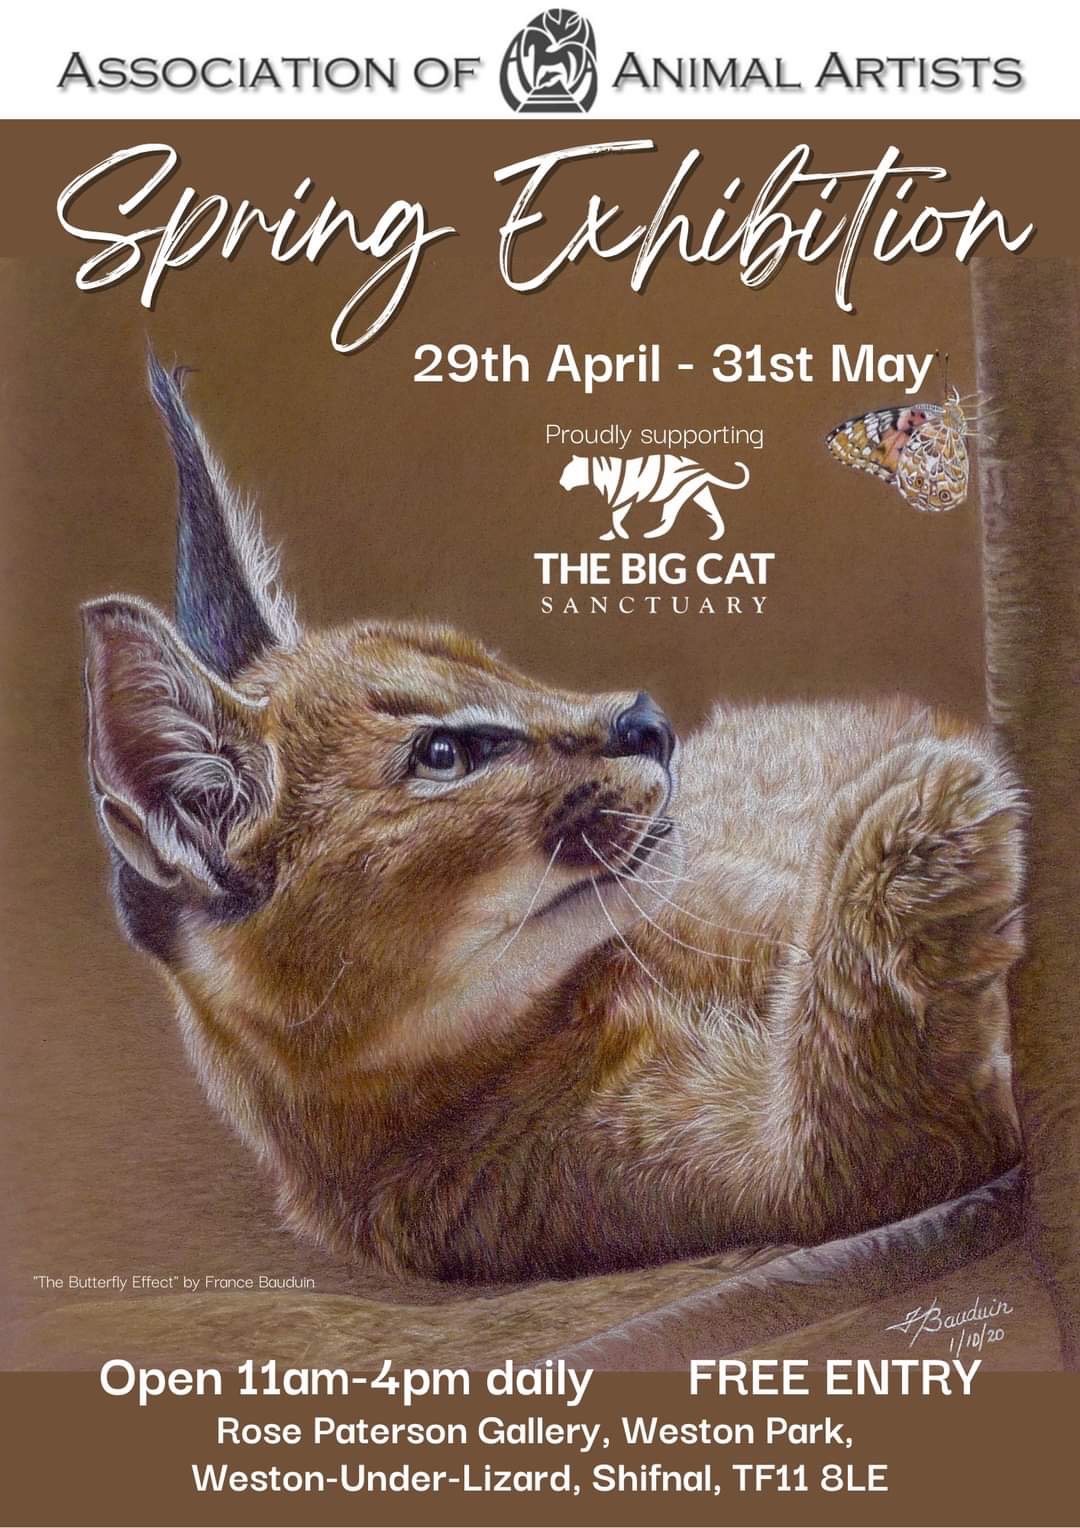 Association of Animal Artists Spring Exhibition